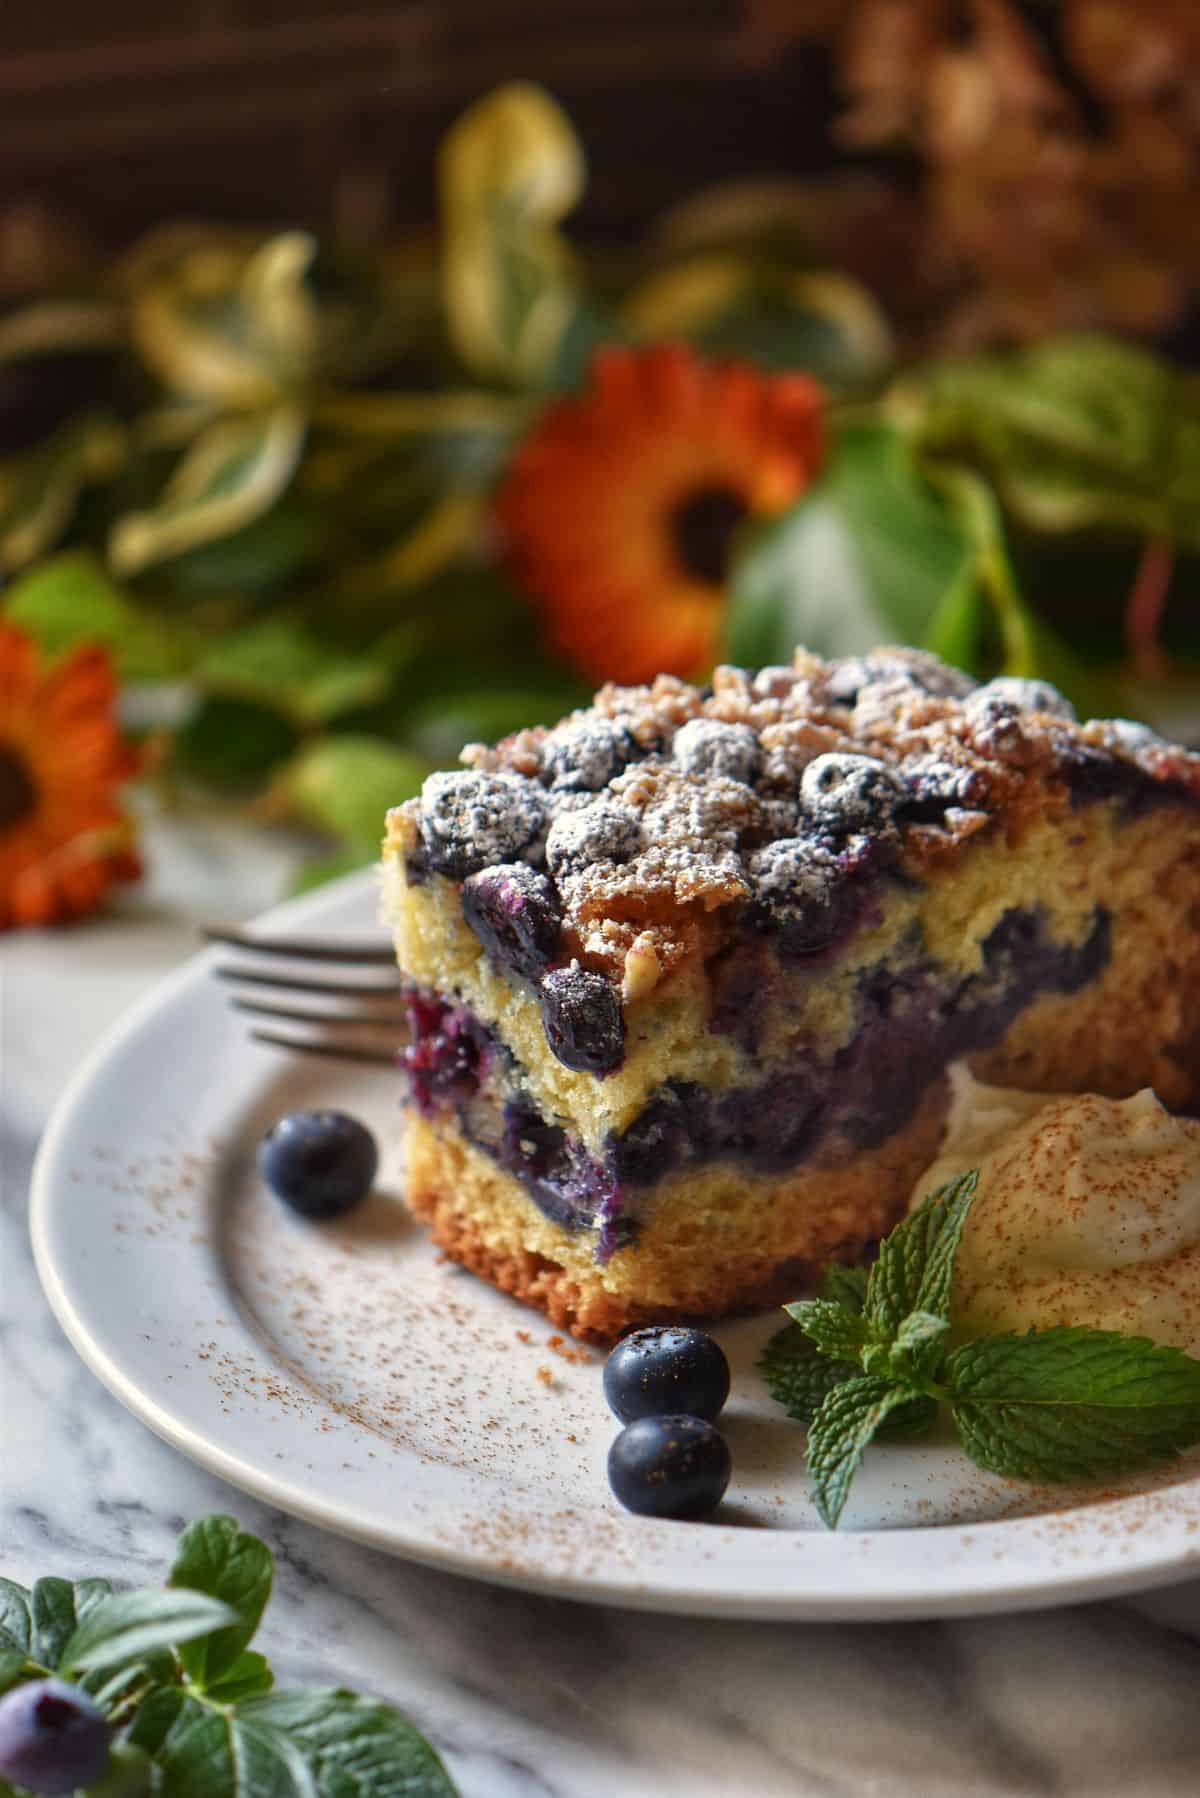 A slice of blueberry cake on a white plate.